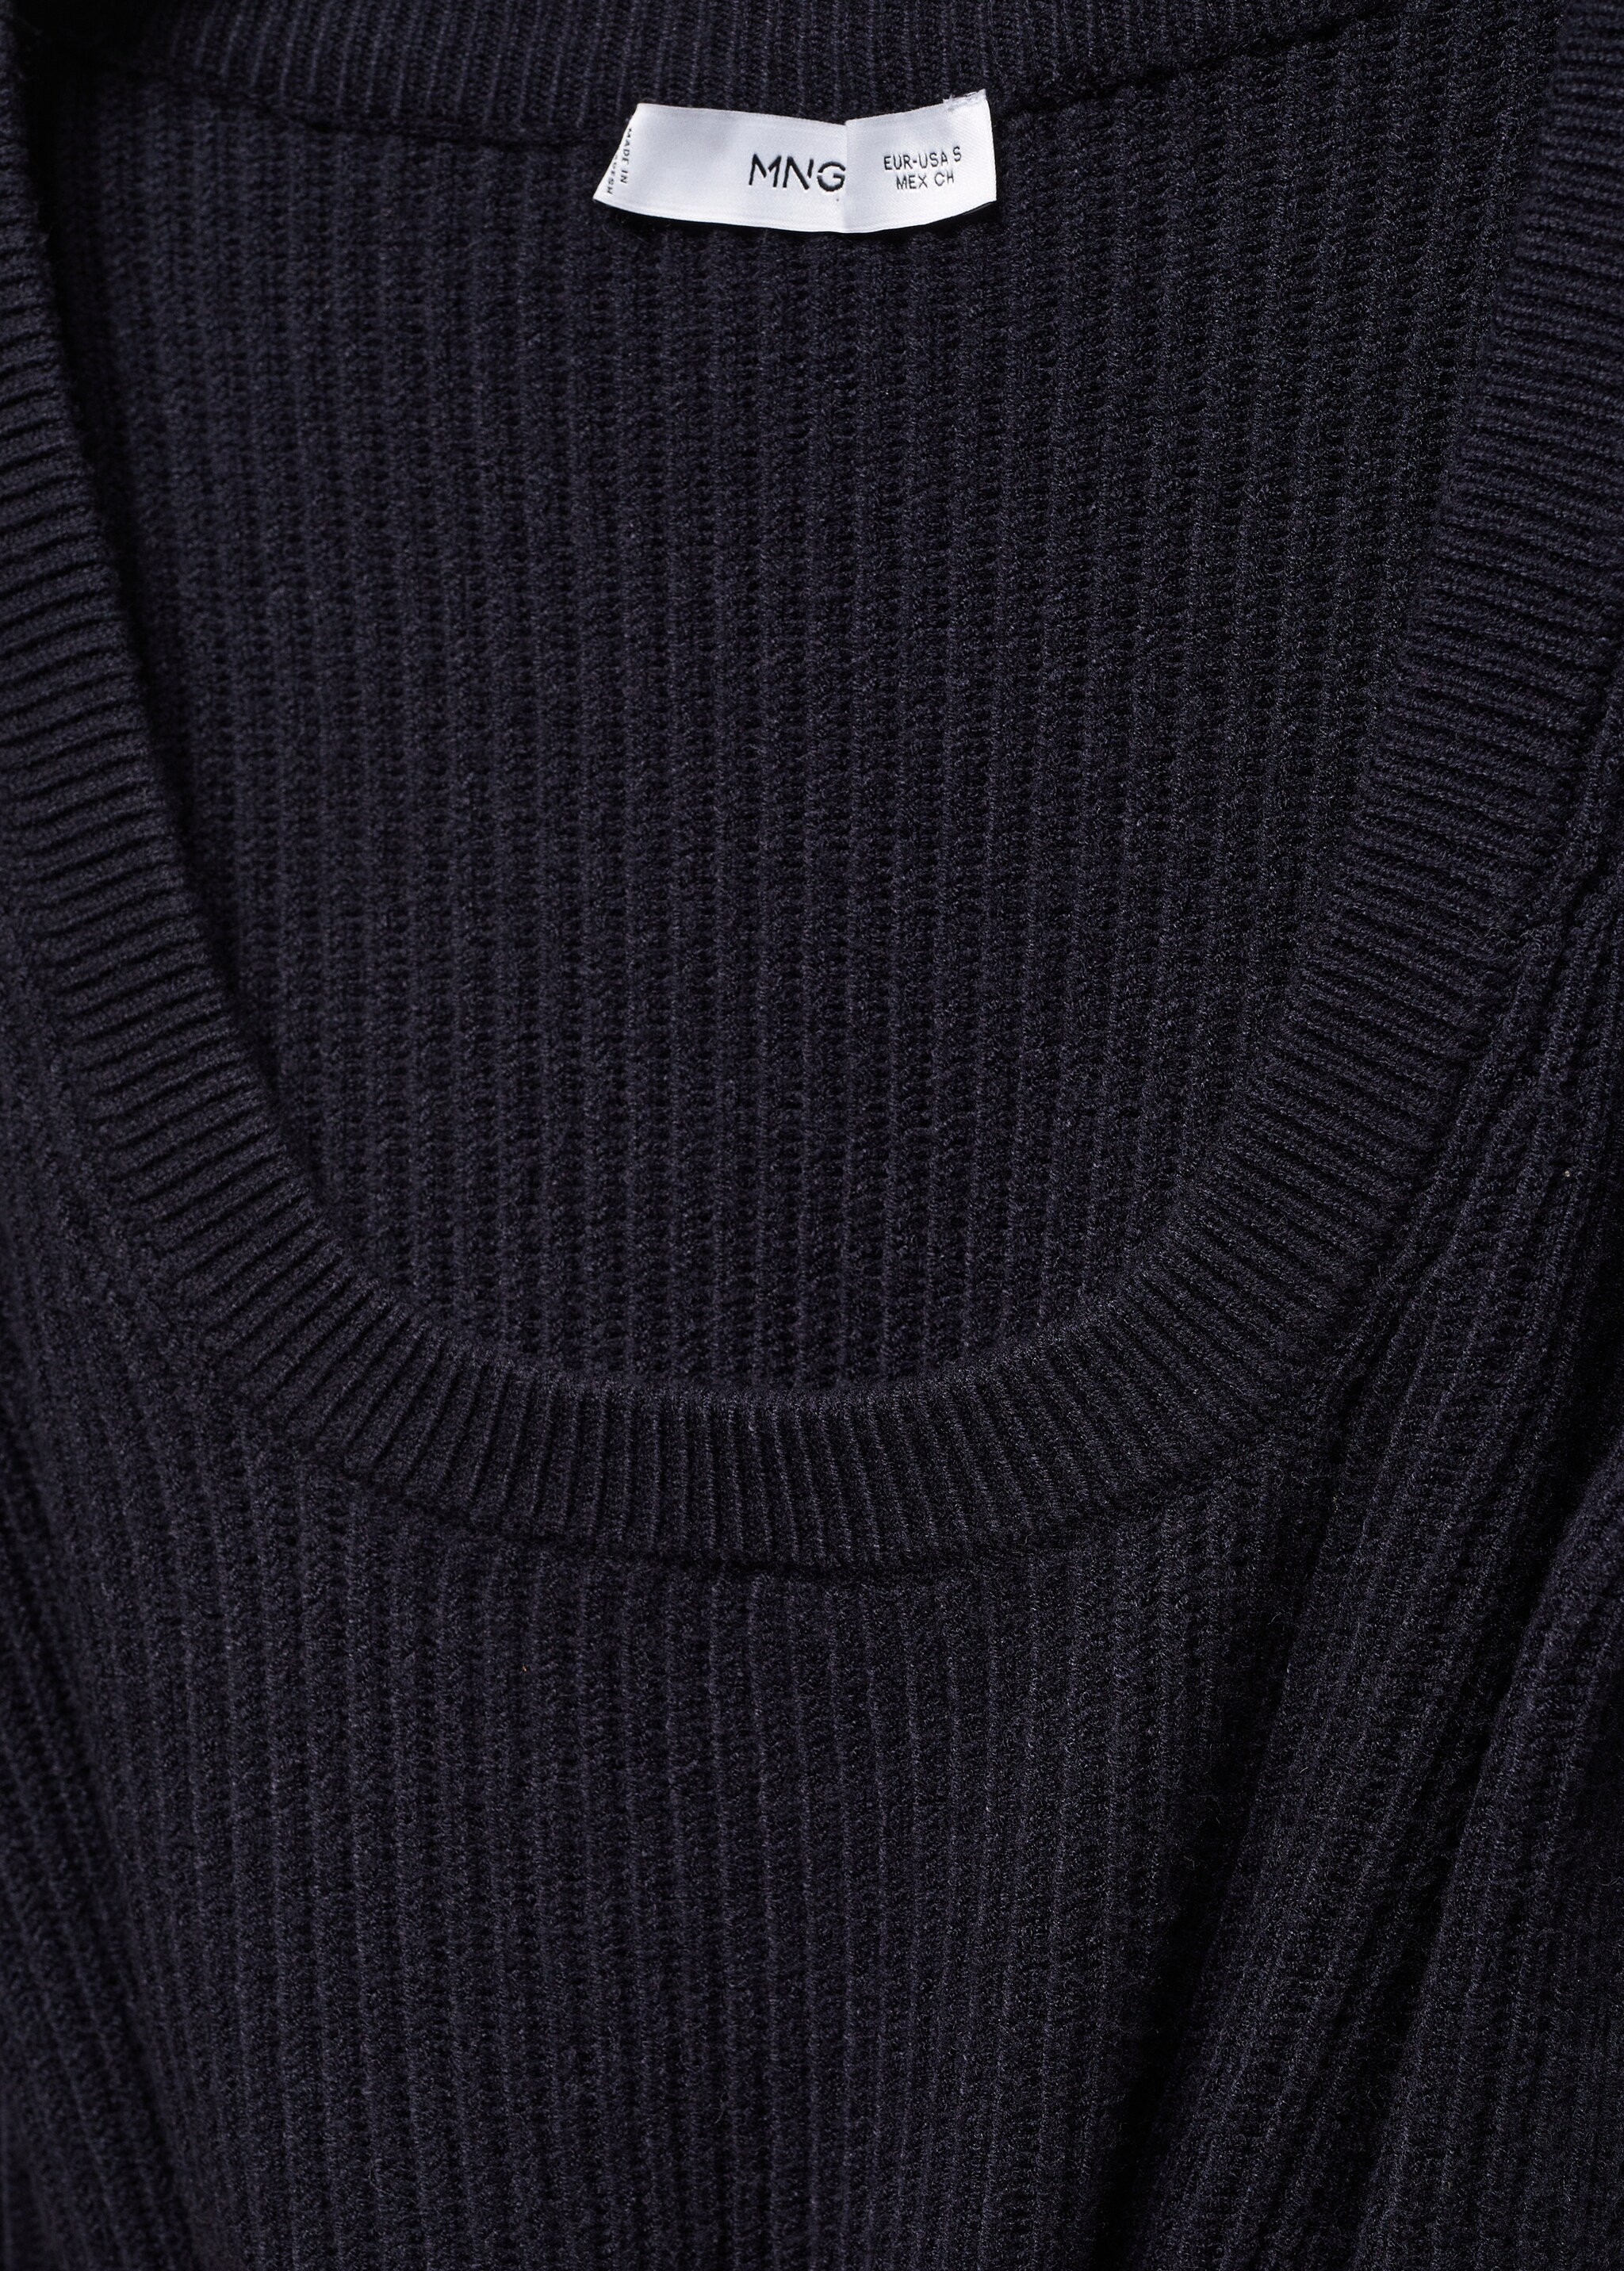 Low-cut neck sweater - Details of the article 8